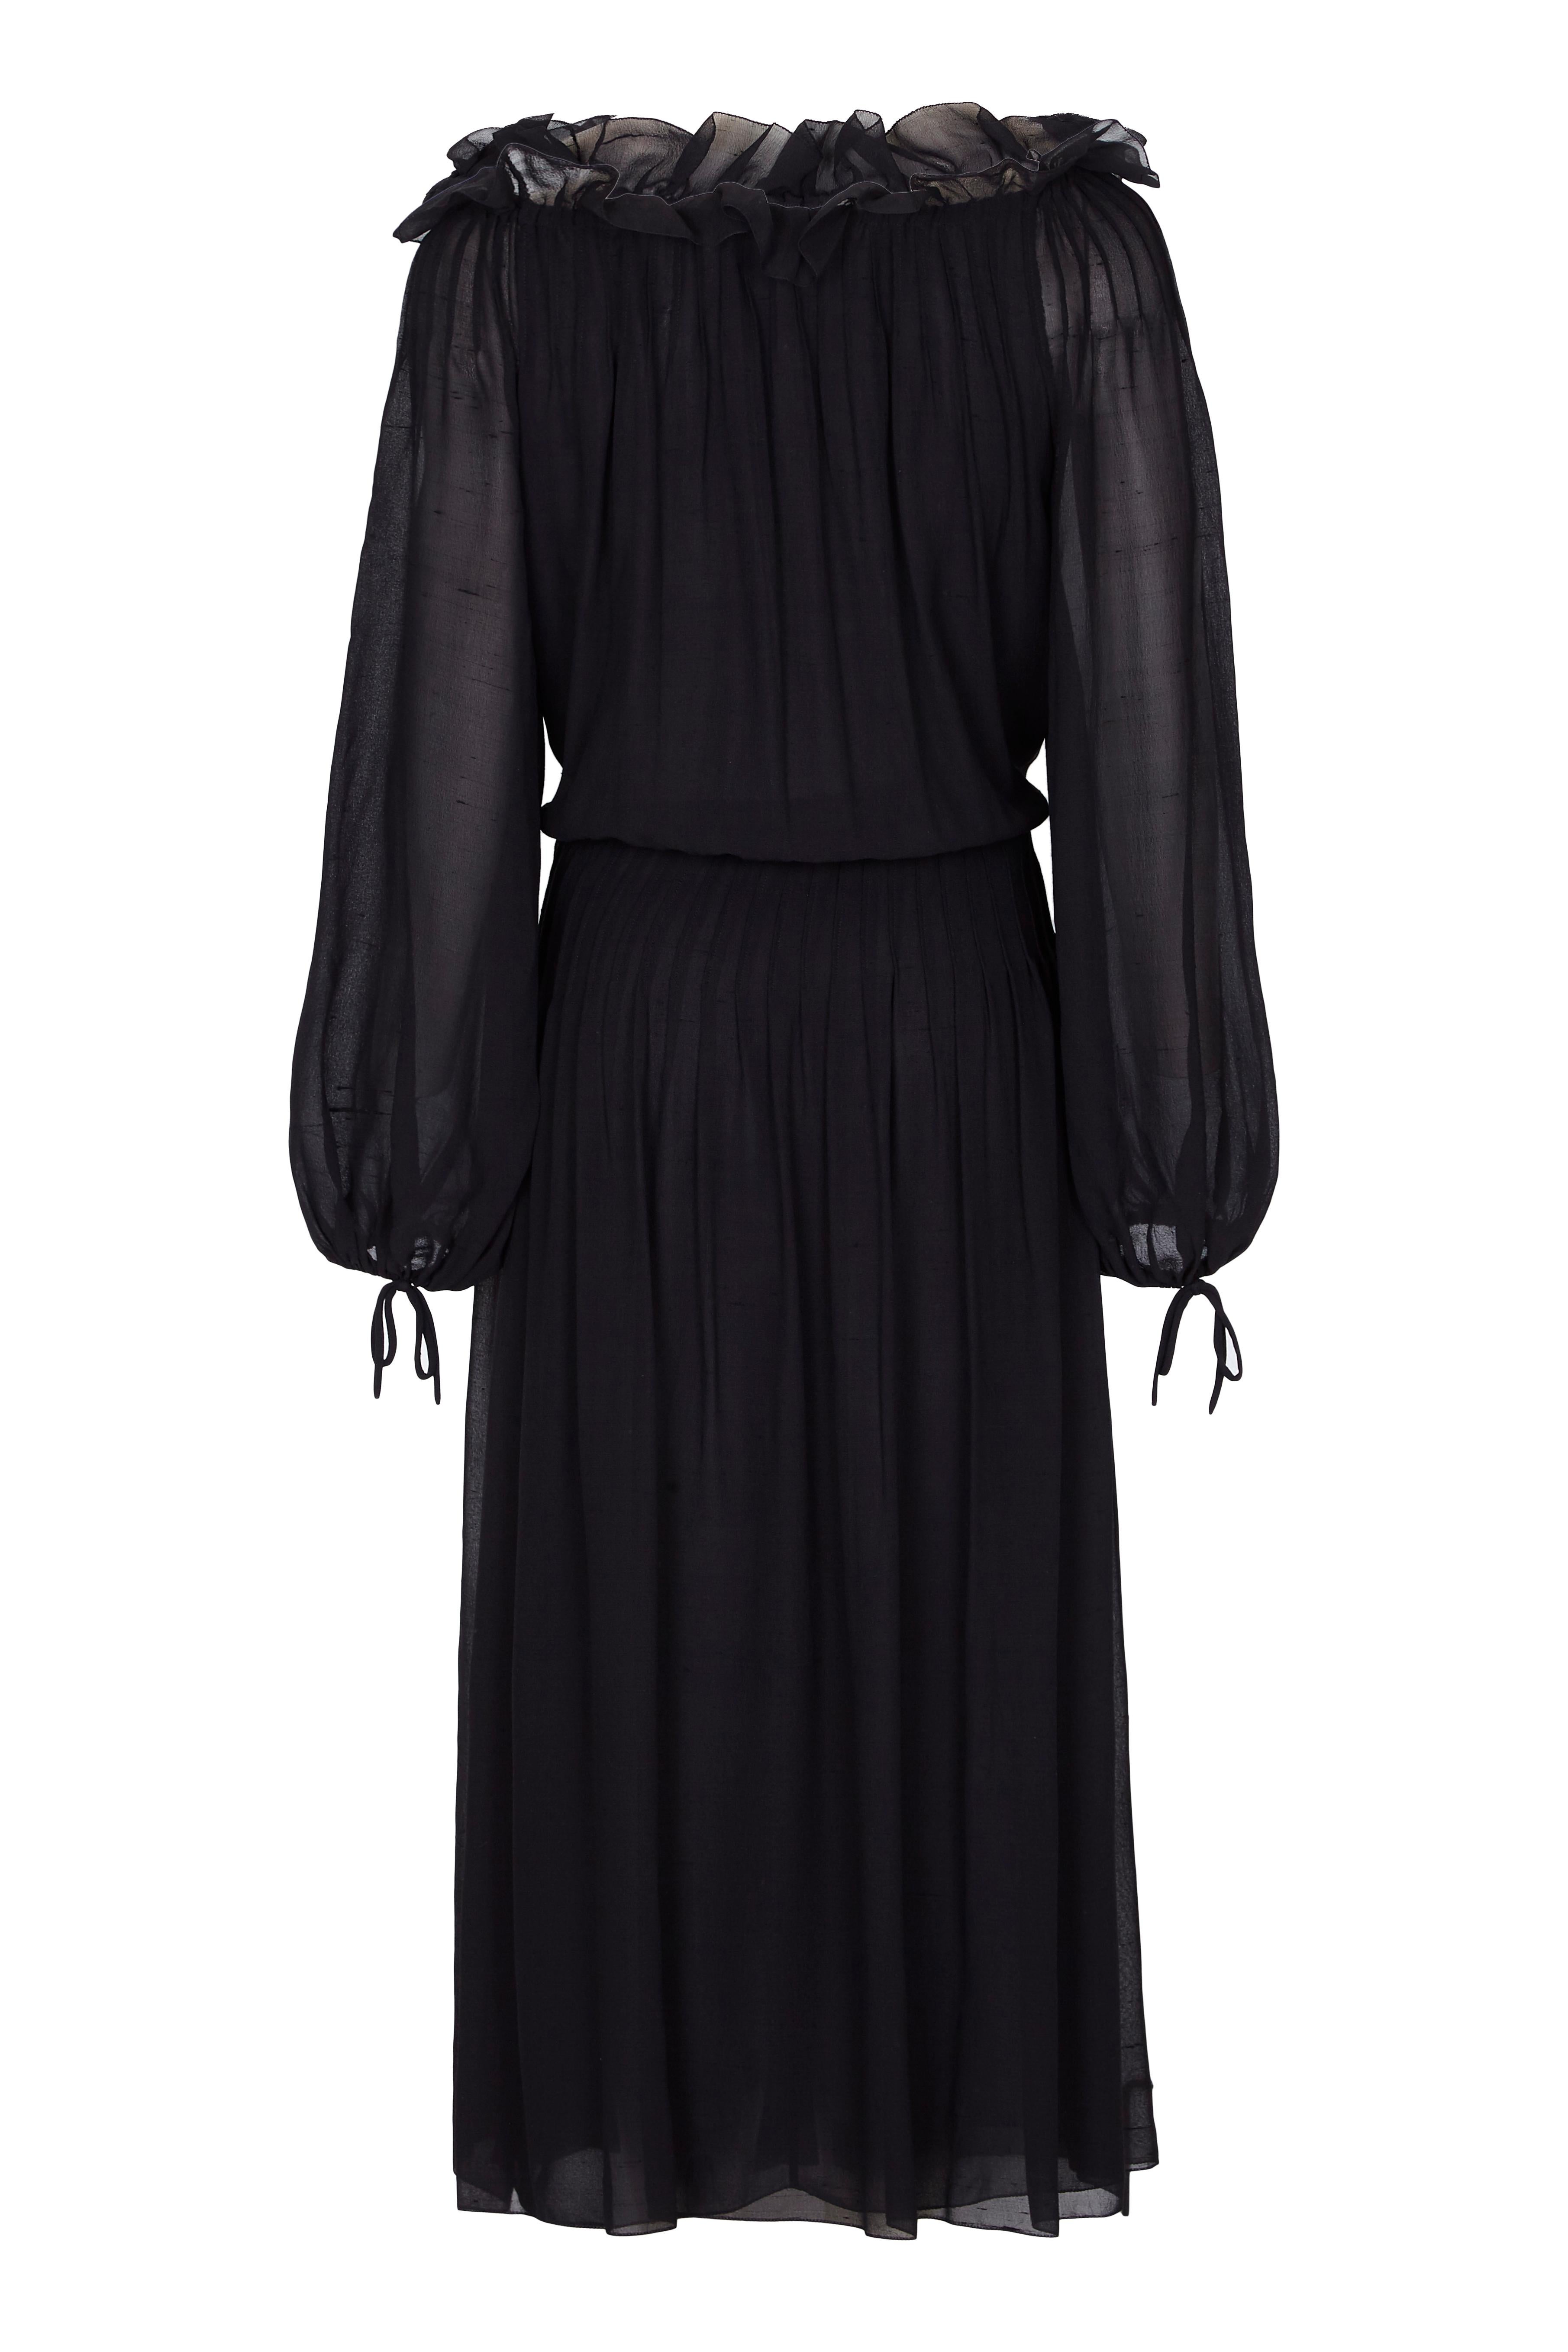 1970s Christian Dior Boutique Couture Label Black Silk Chiffon Dress In Excellent Condition In London, GB